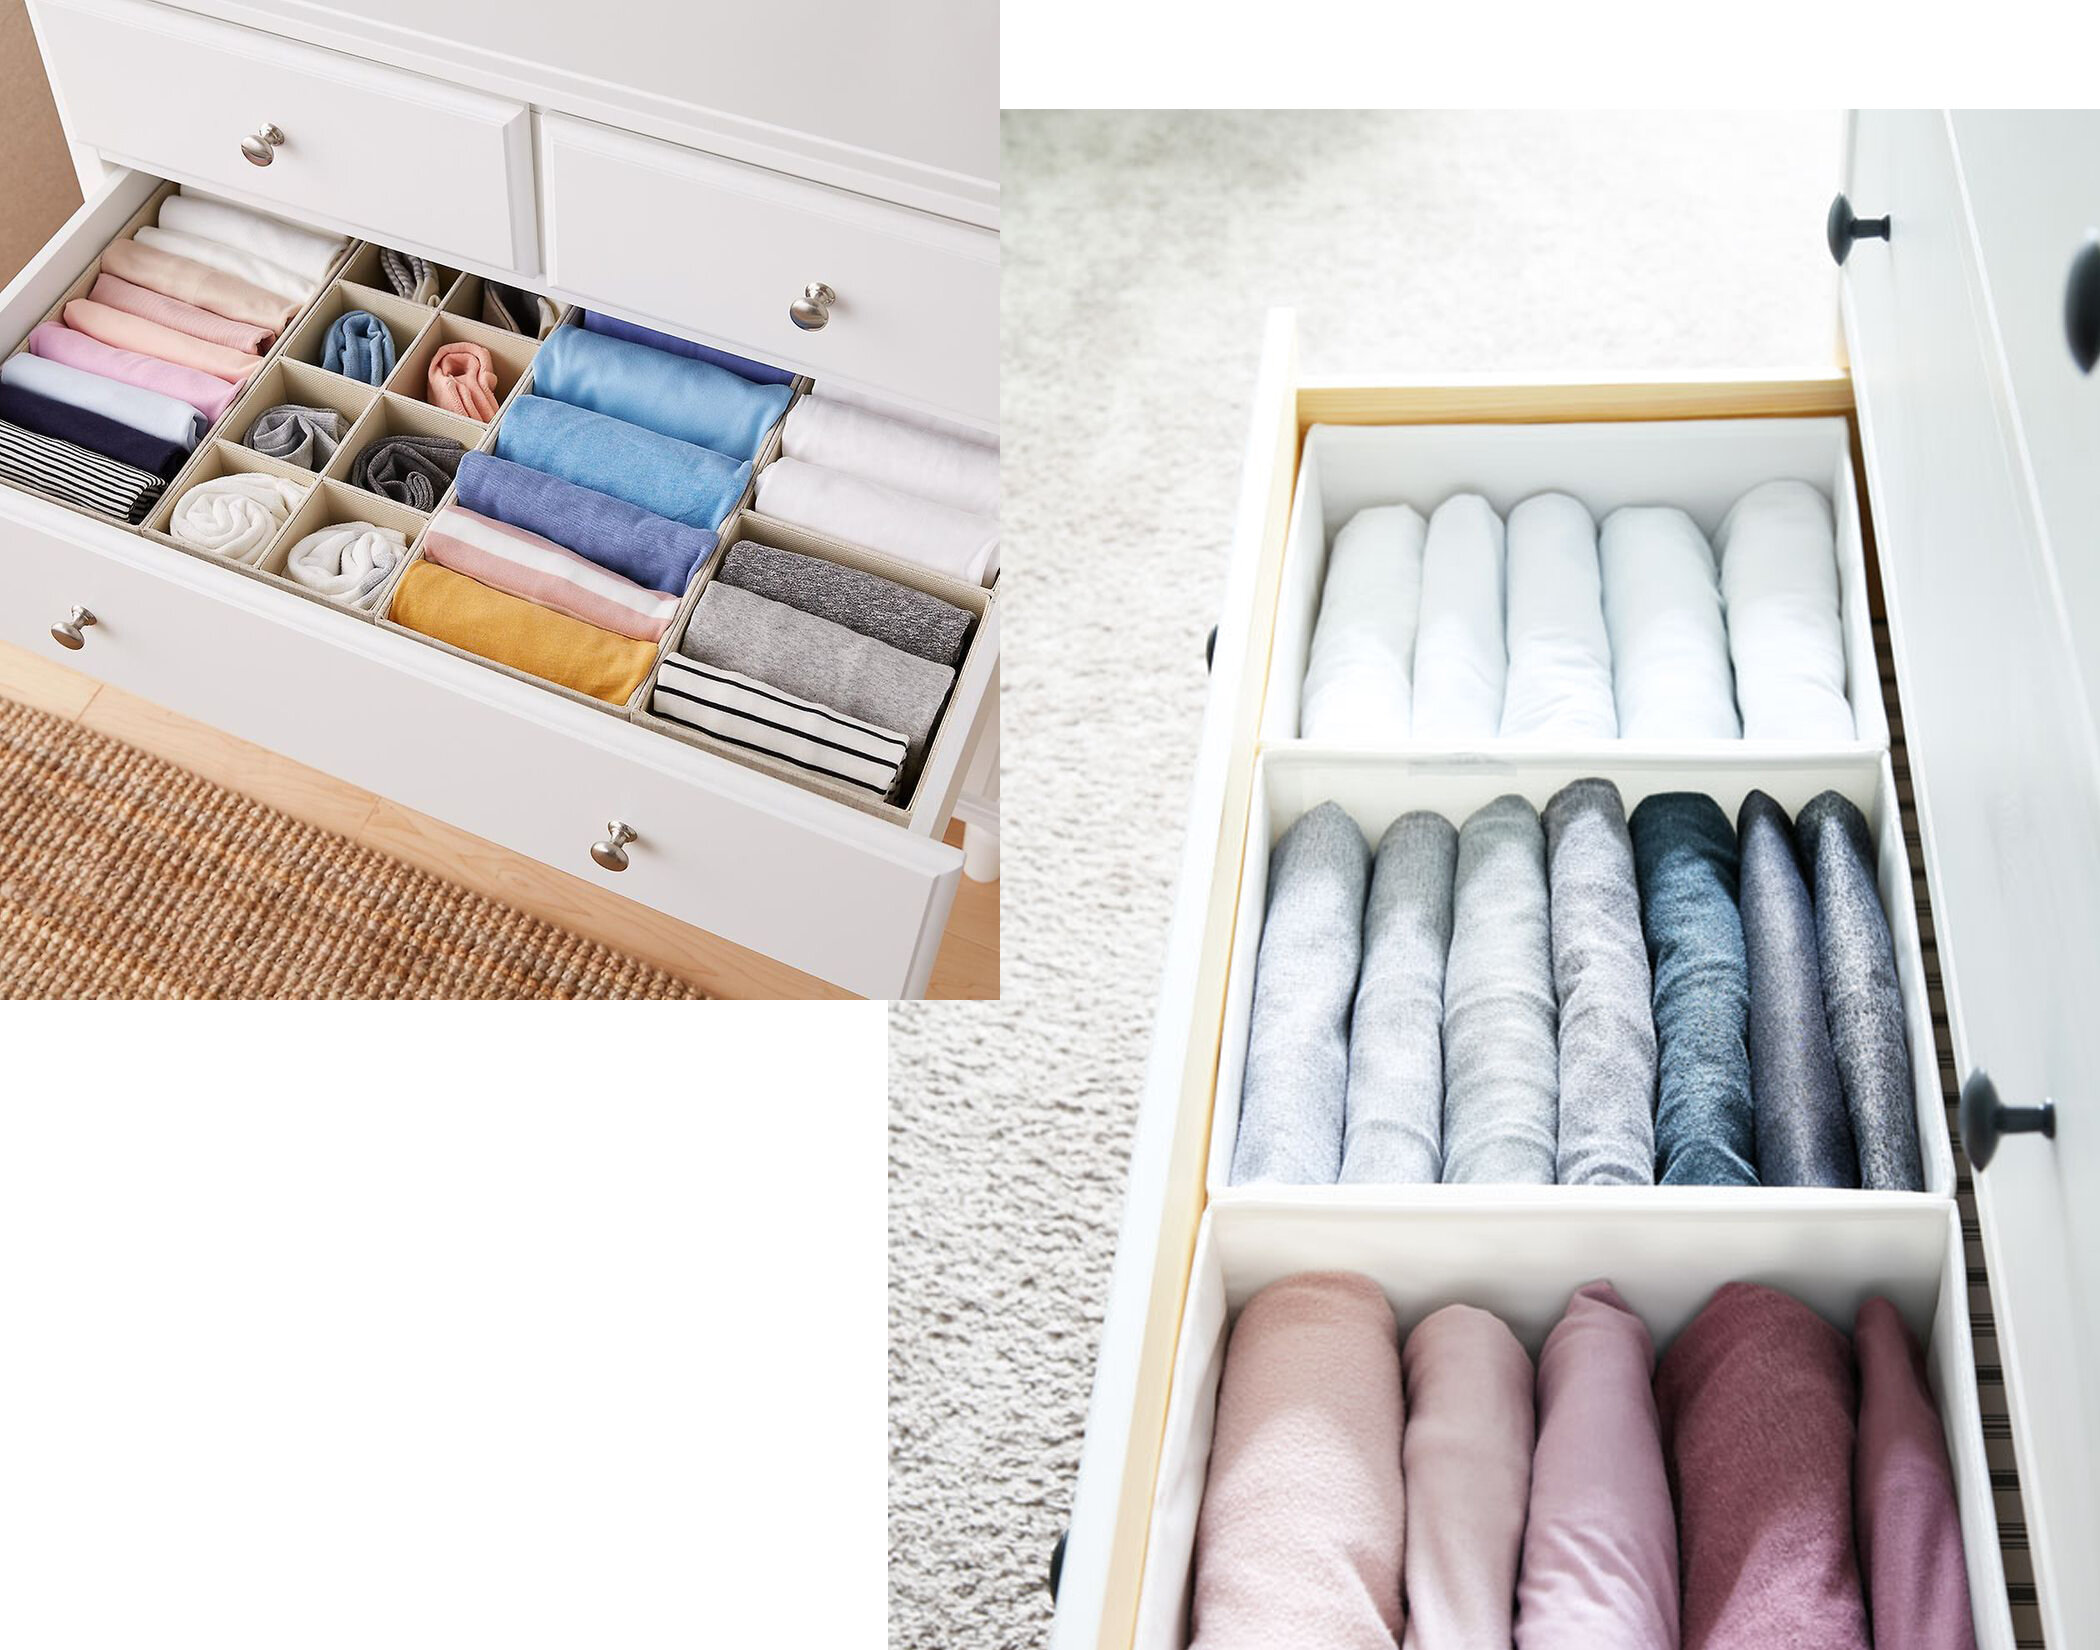 19 Ways To Neatly Store All The New Loungewear You've Been Buying